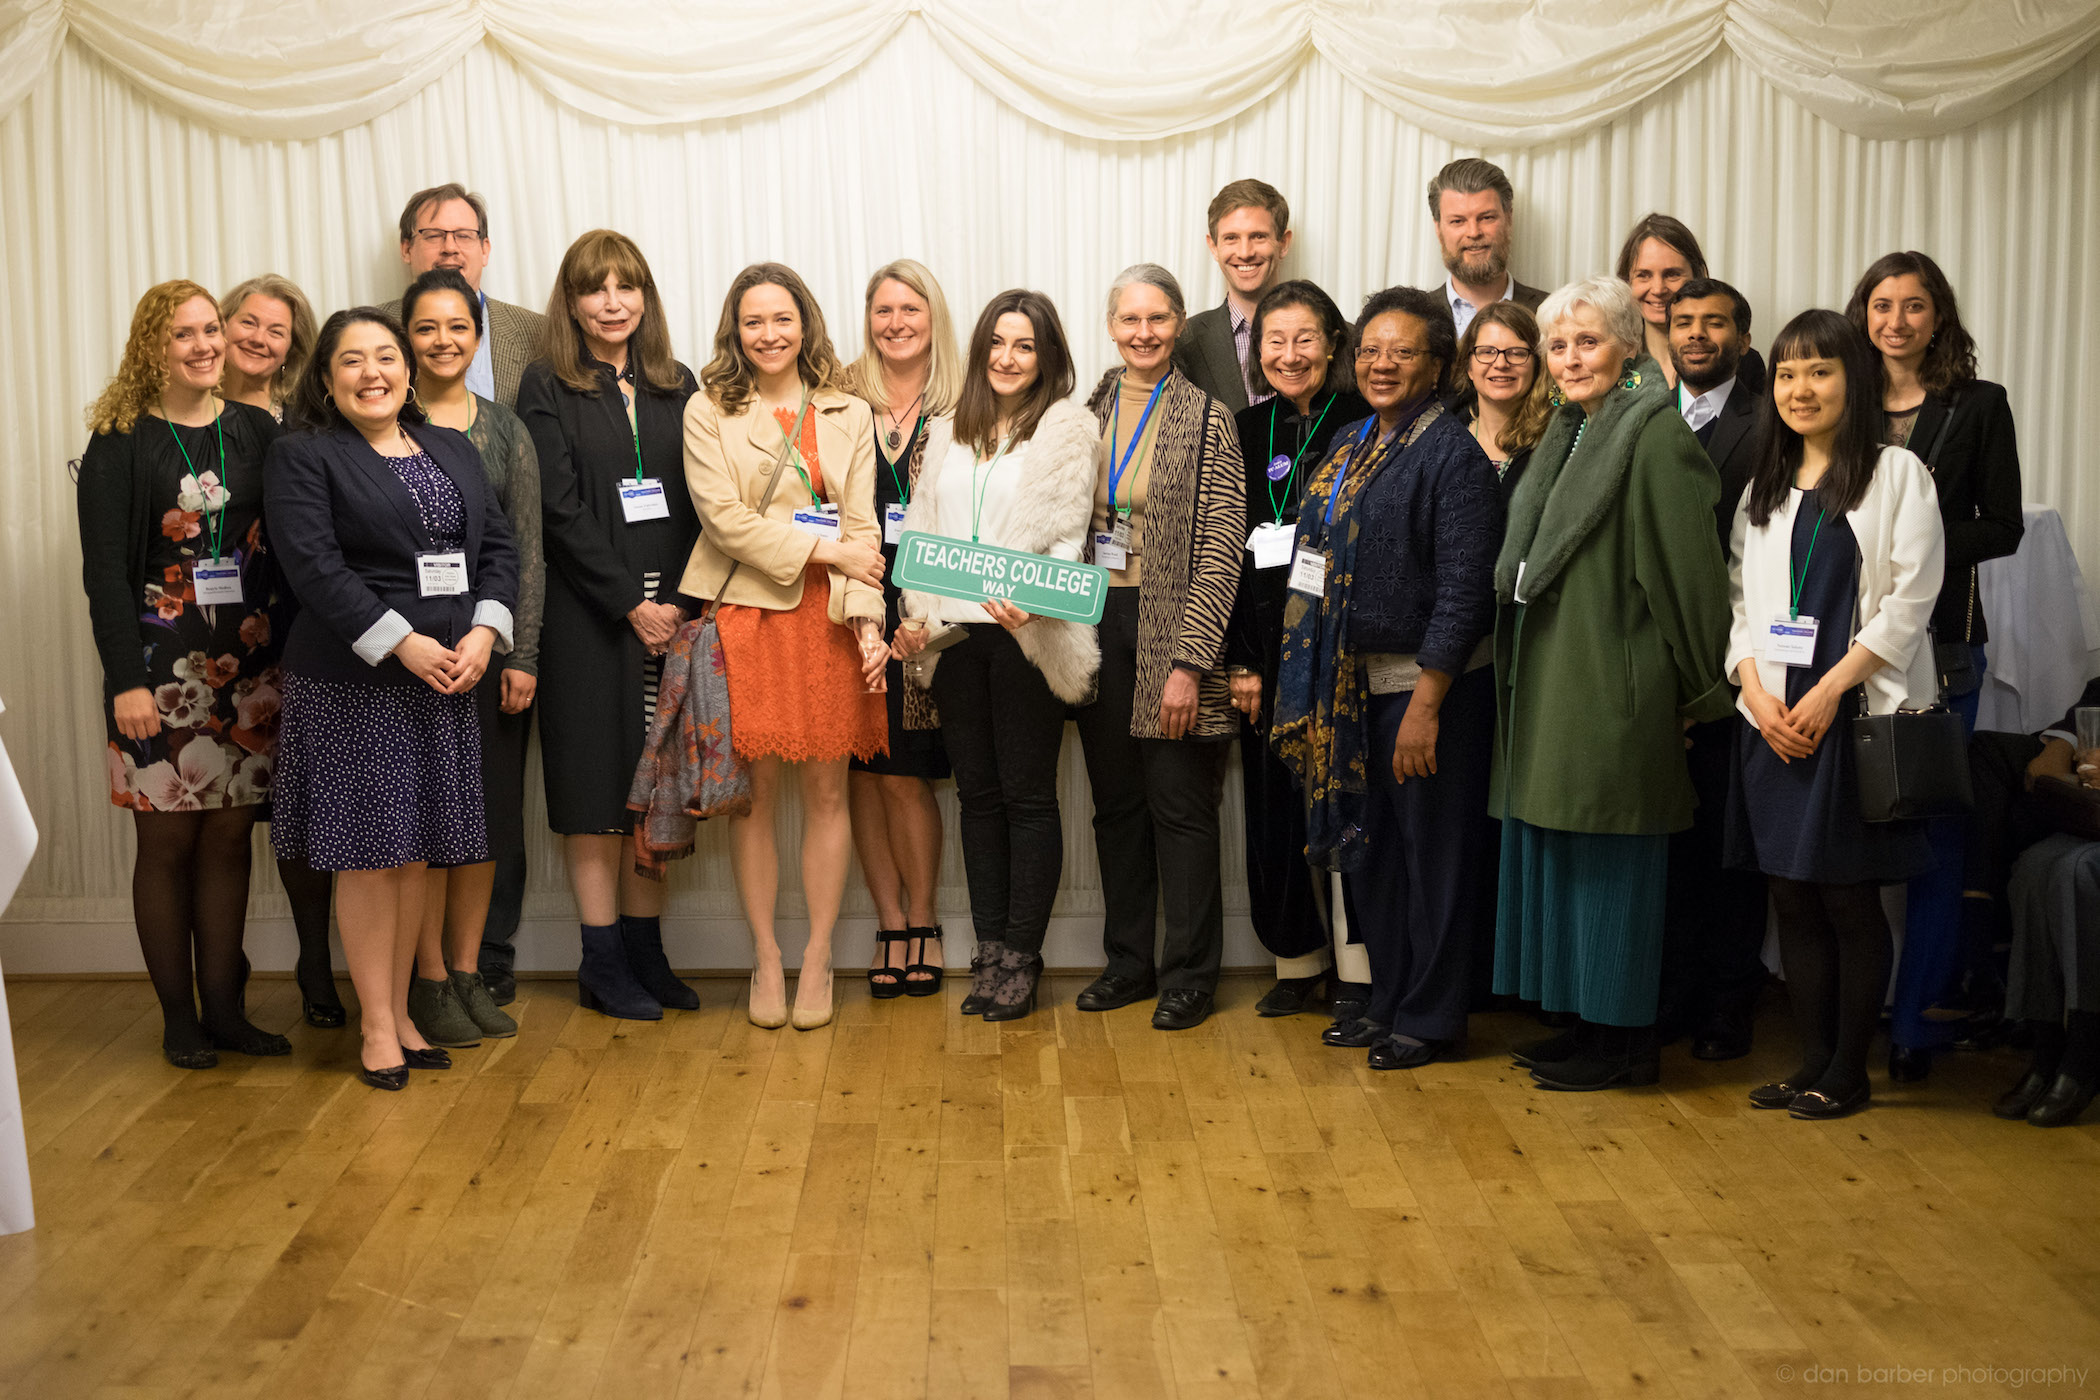 President Susan Fuhrman (Ph.D. ’77) and TC alumni in London were treated to a special night at the House of Commons.